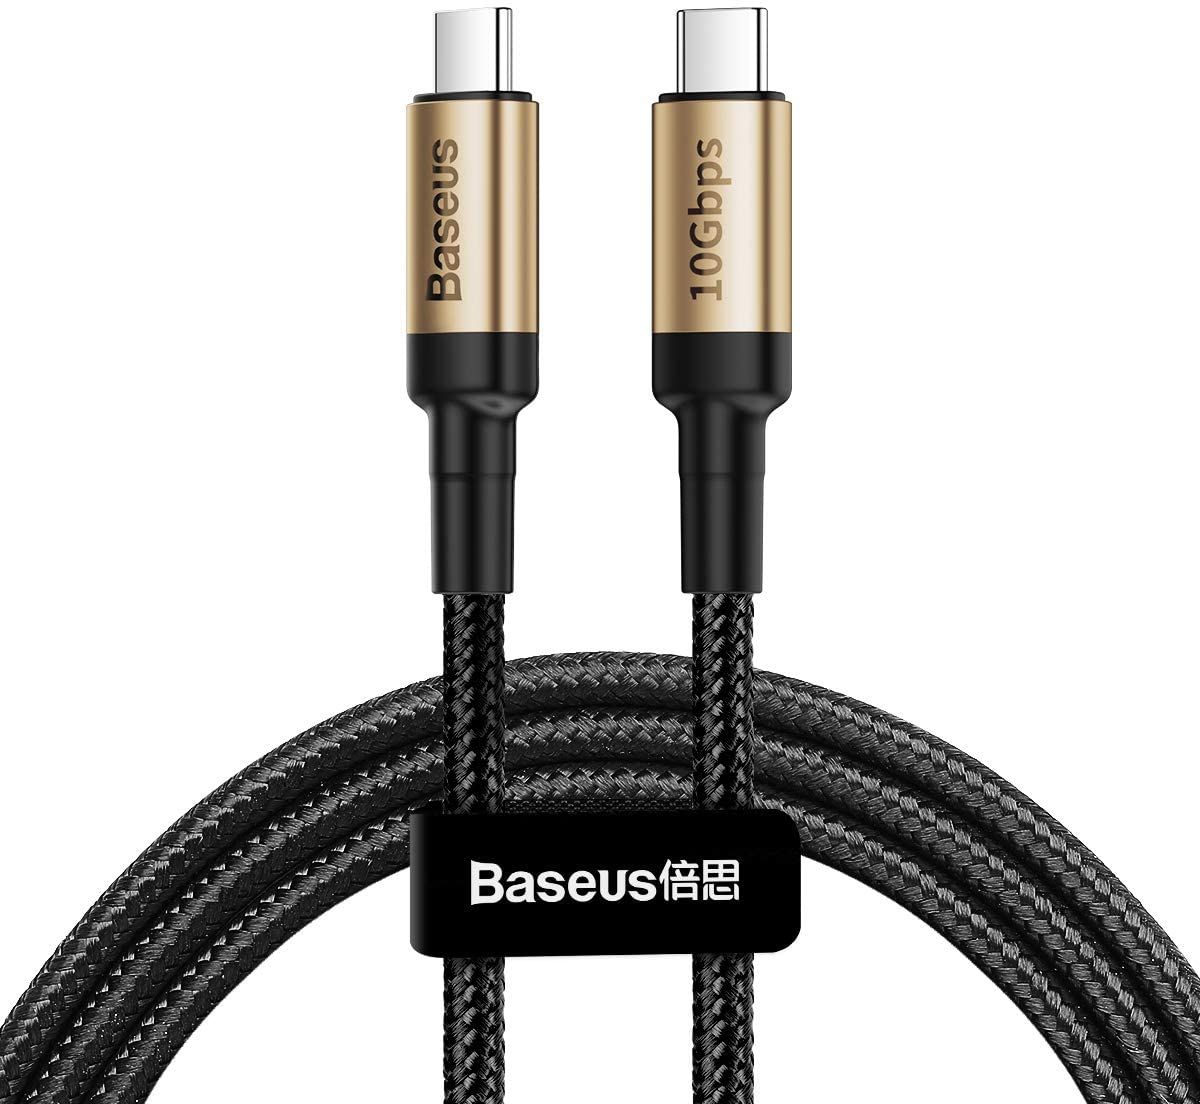 This braided cable is ideal for fast charging, with support for 100W.  Its data transfer speed is limited to 480 Mbps.